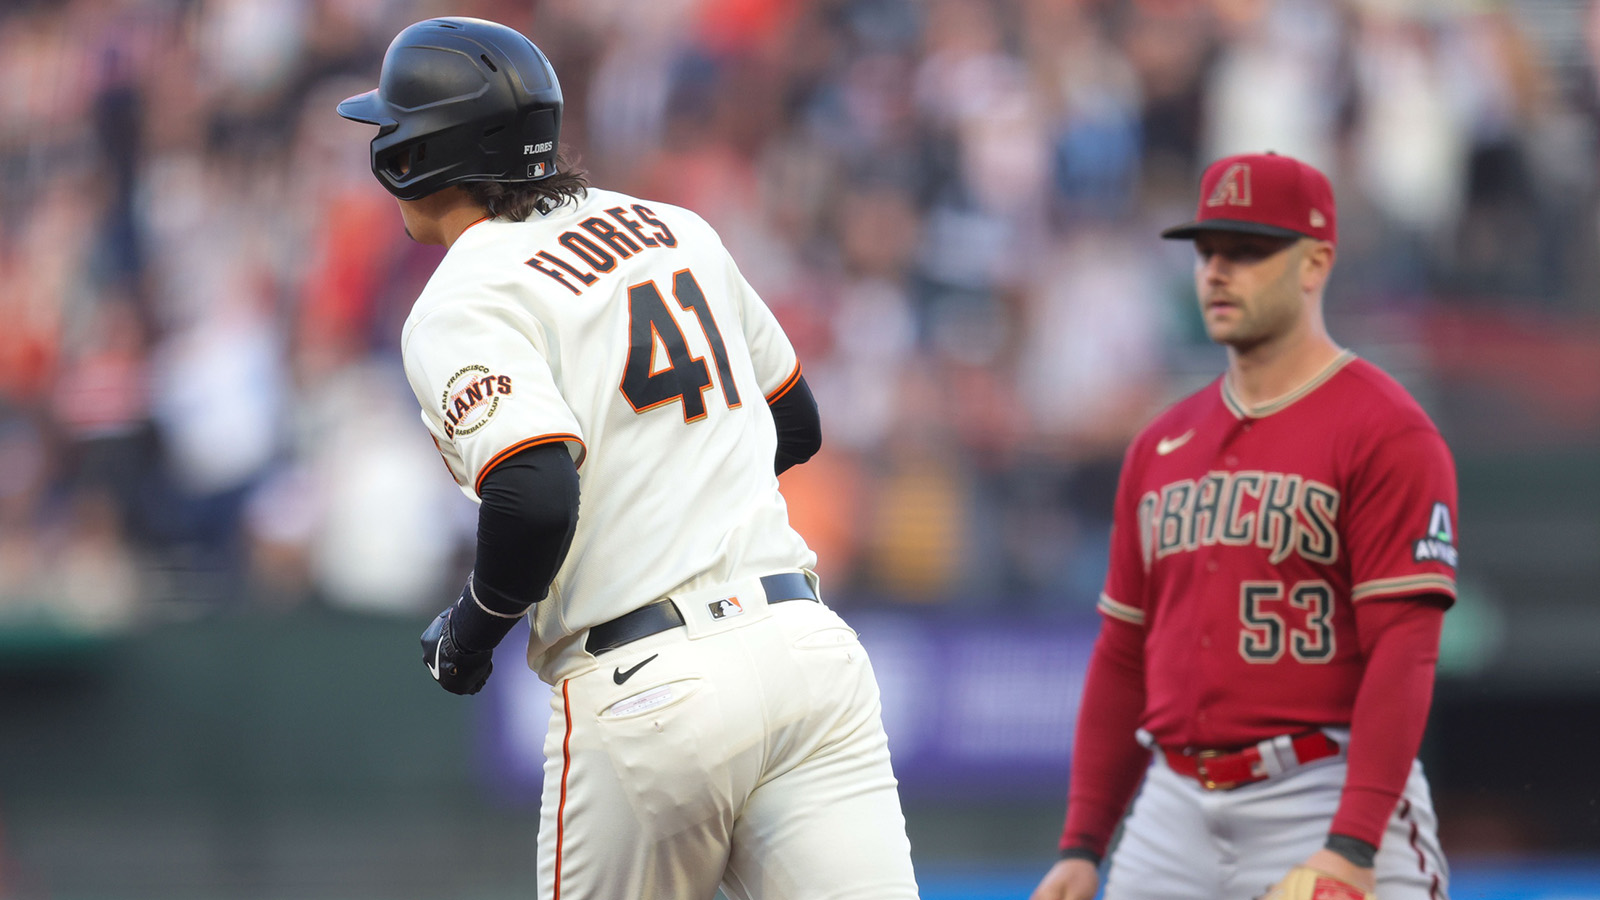 SF Giants watch NL Wild Card hopes dwindle to less than 1